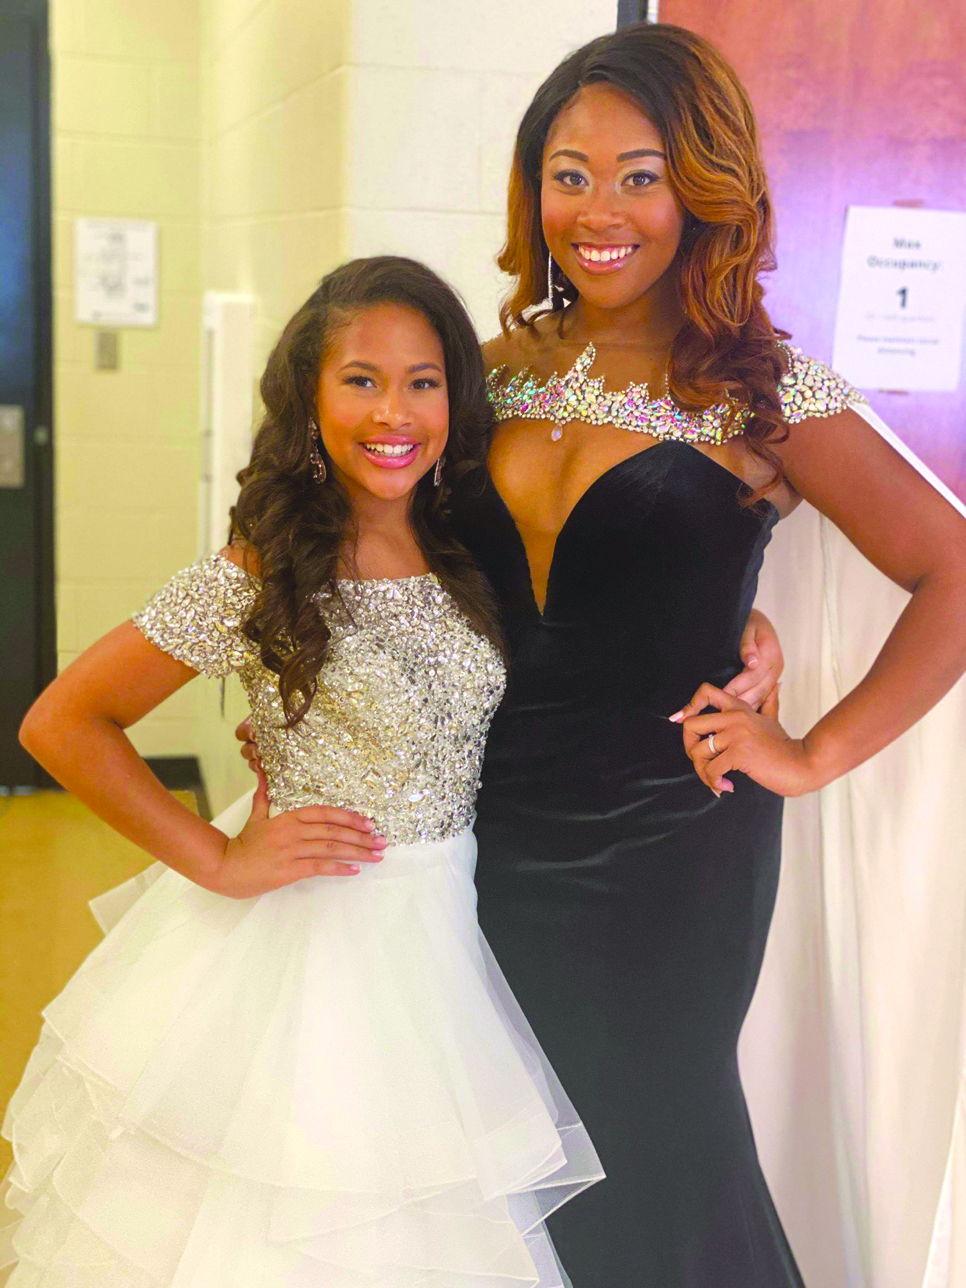 Two local young women win at the Miss Alabama United States Pageant